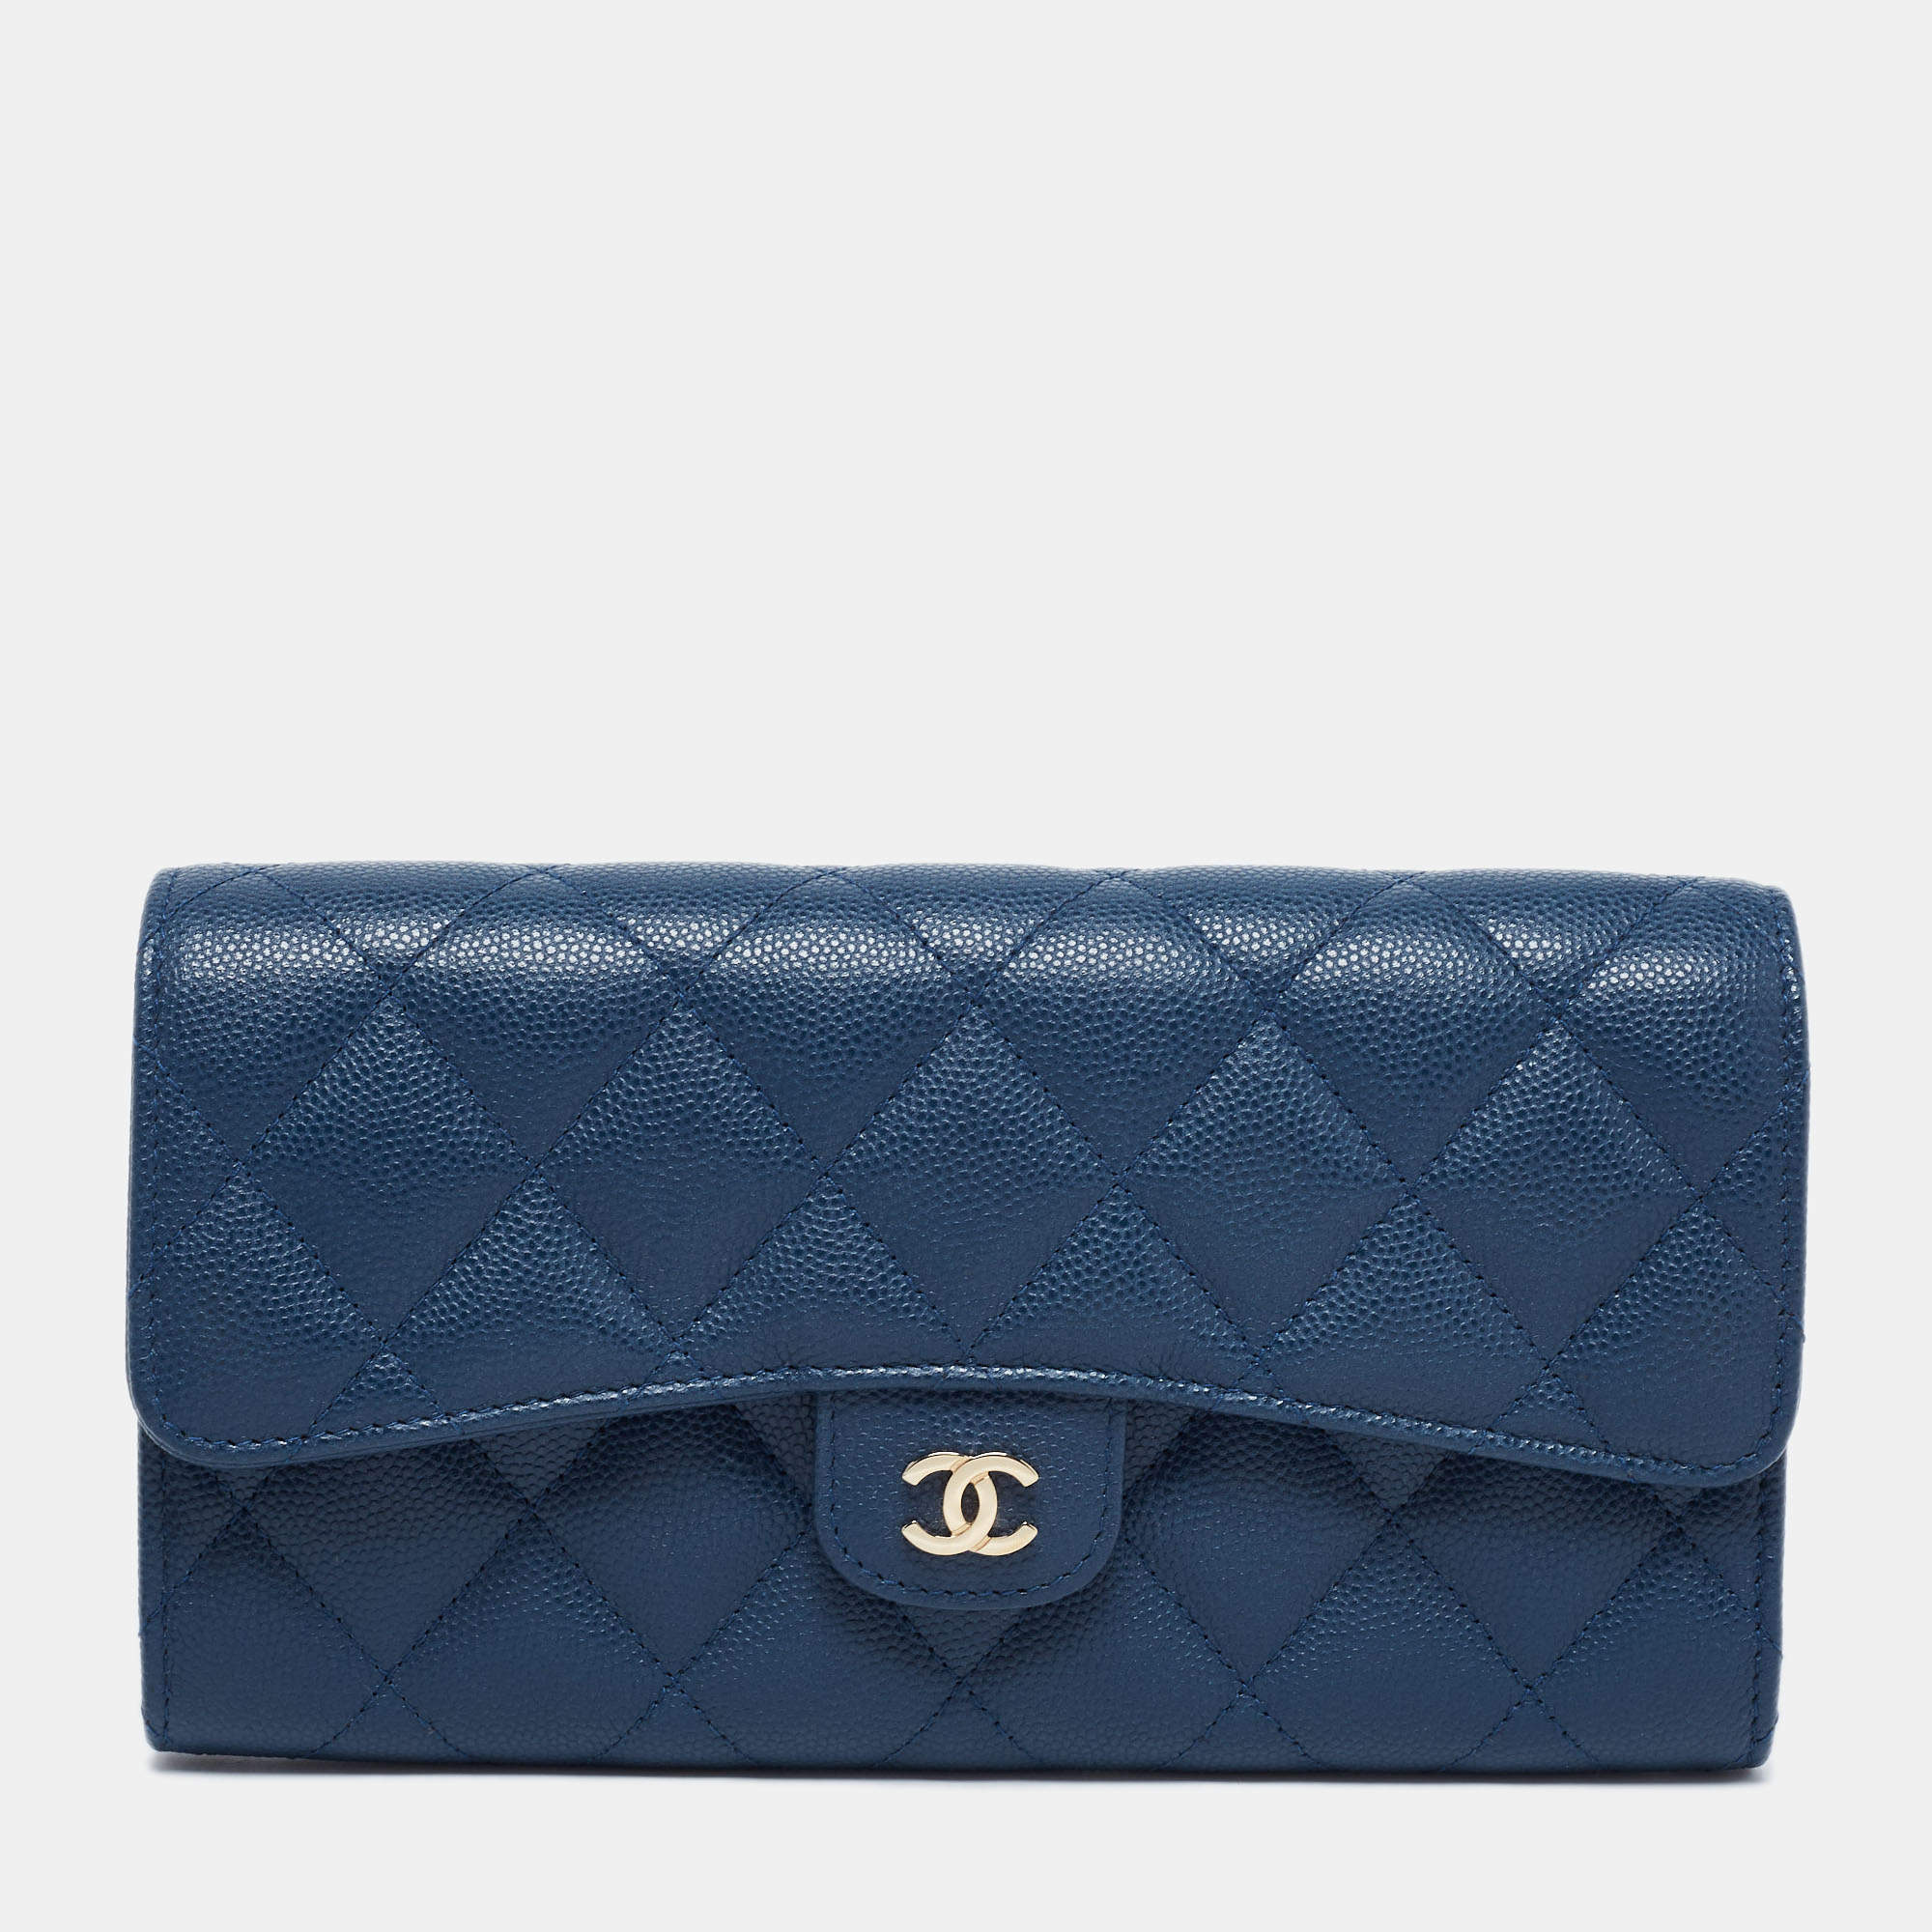 Chanel Blue Leather Classic Flap Wallet